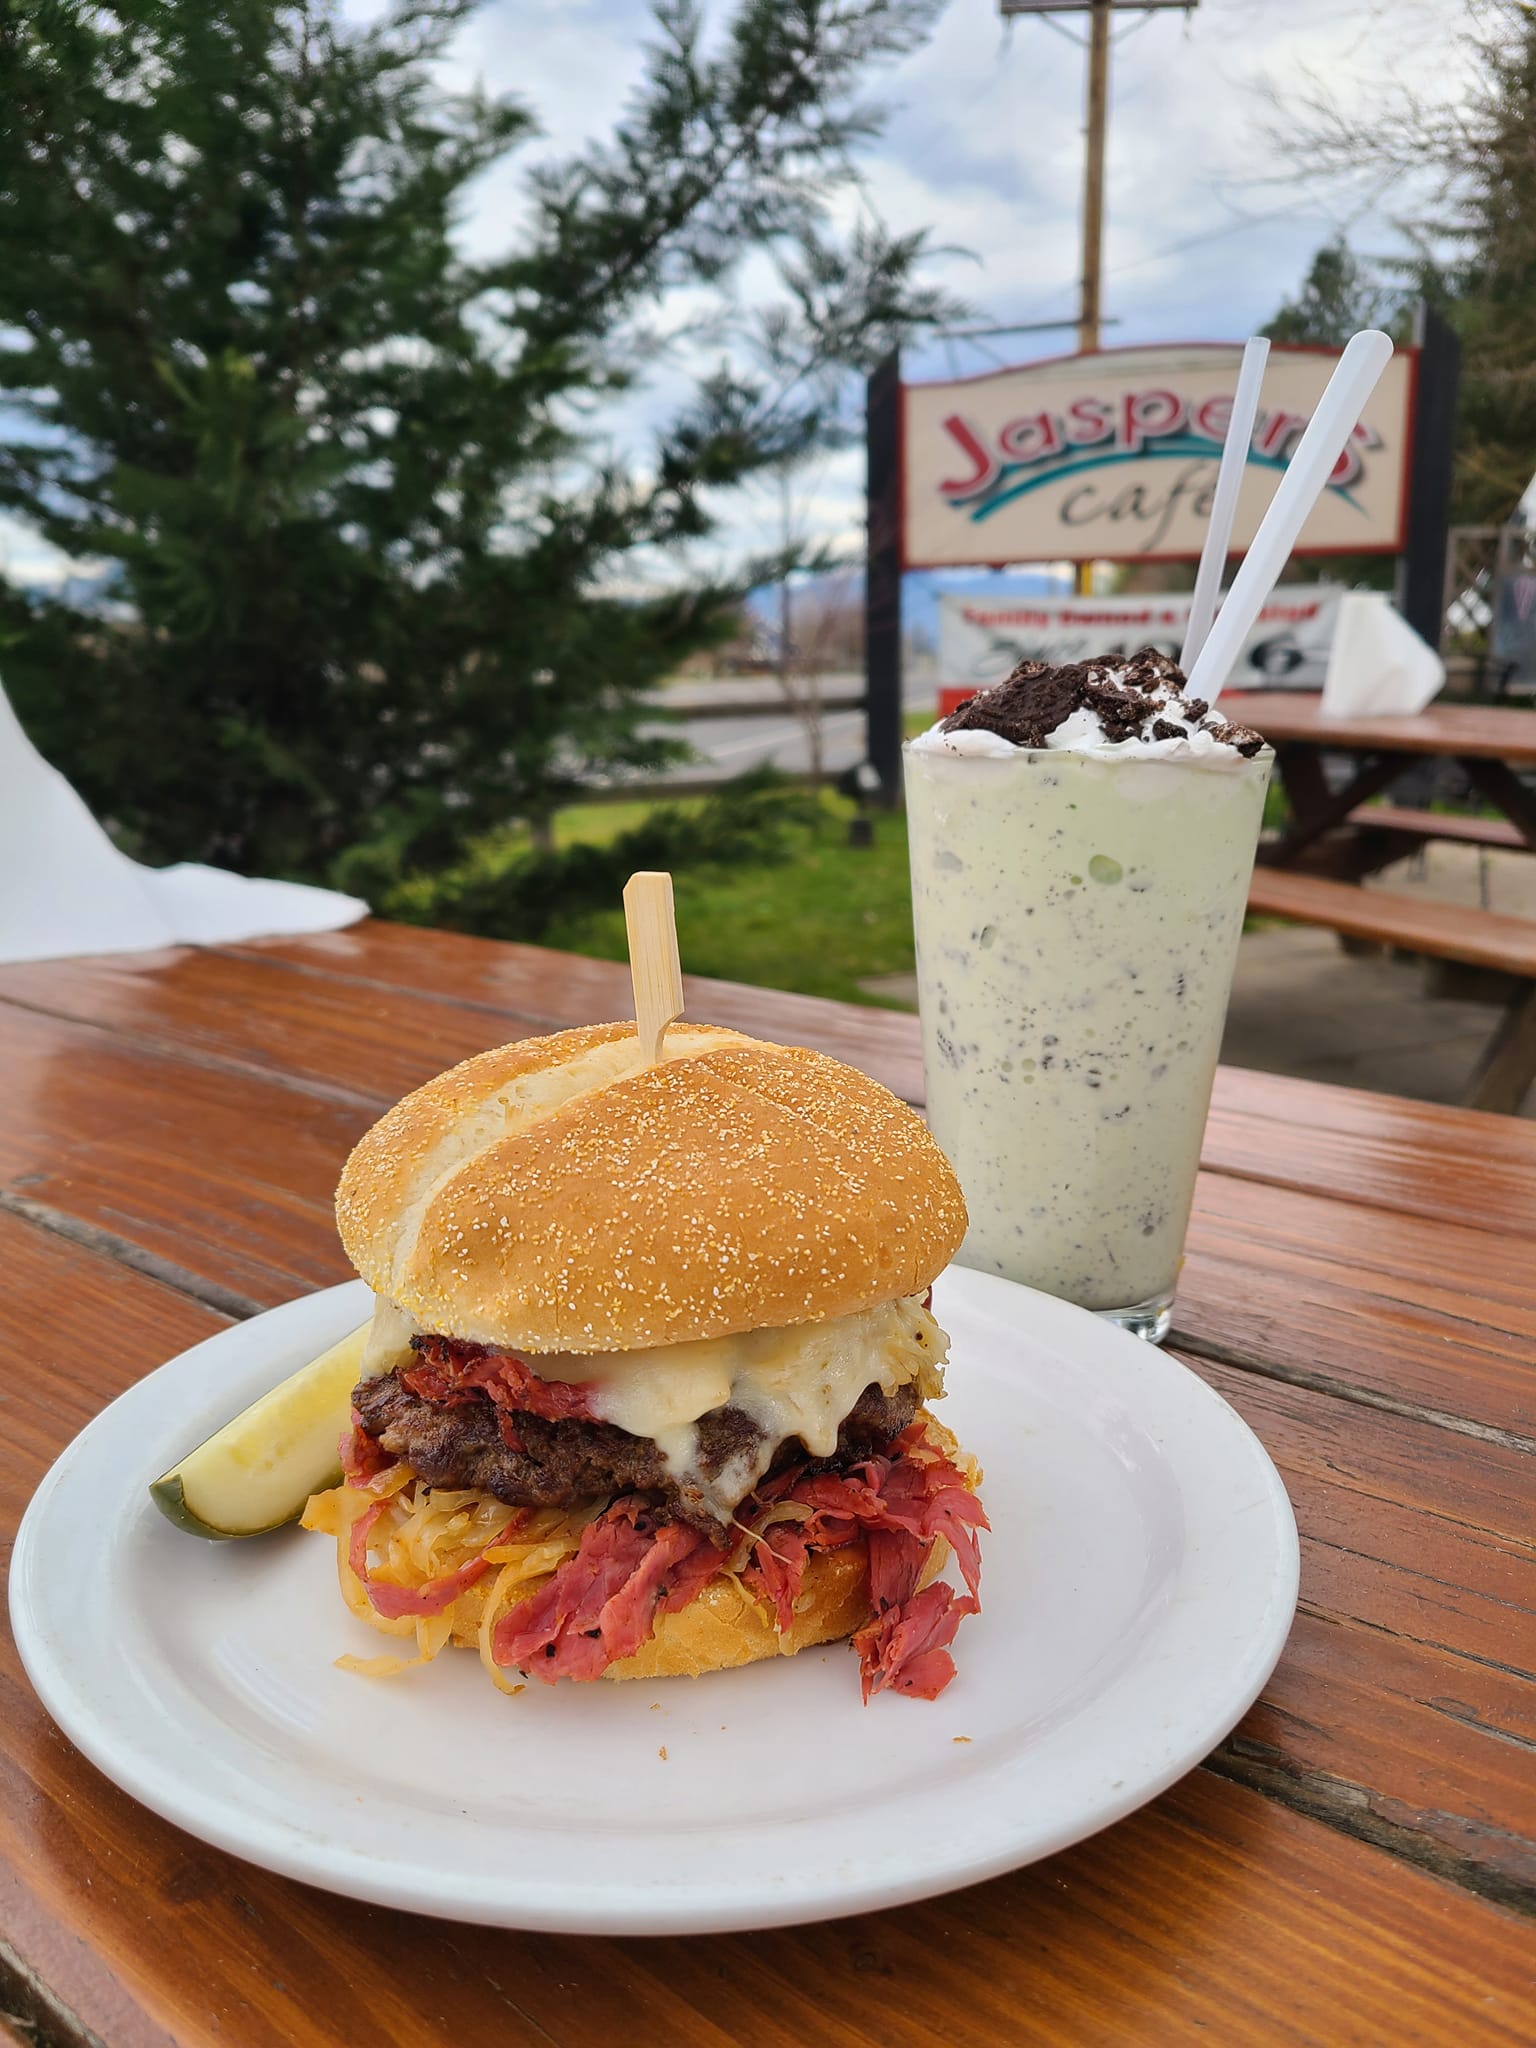 A delicious looking burger and shake at Jasper's Cafe in Medford Oregon